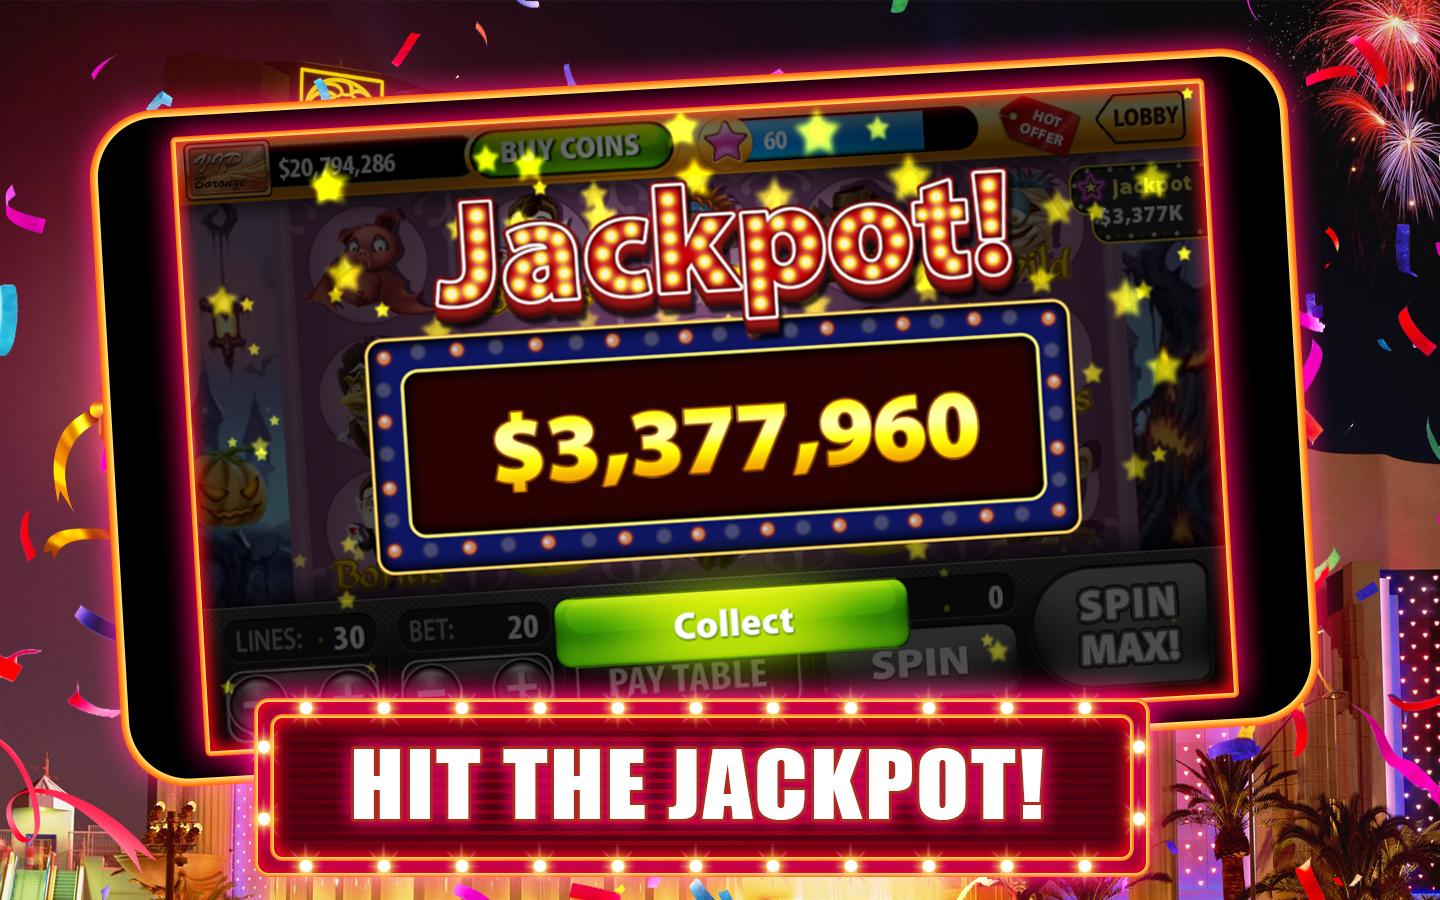 How To Win On The Slot Machines